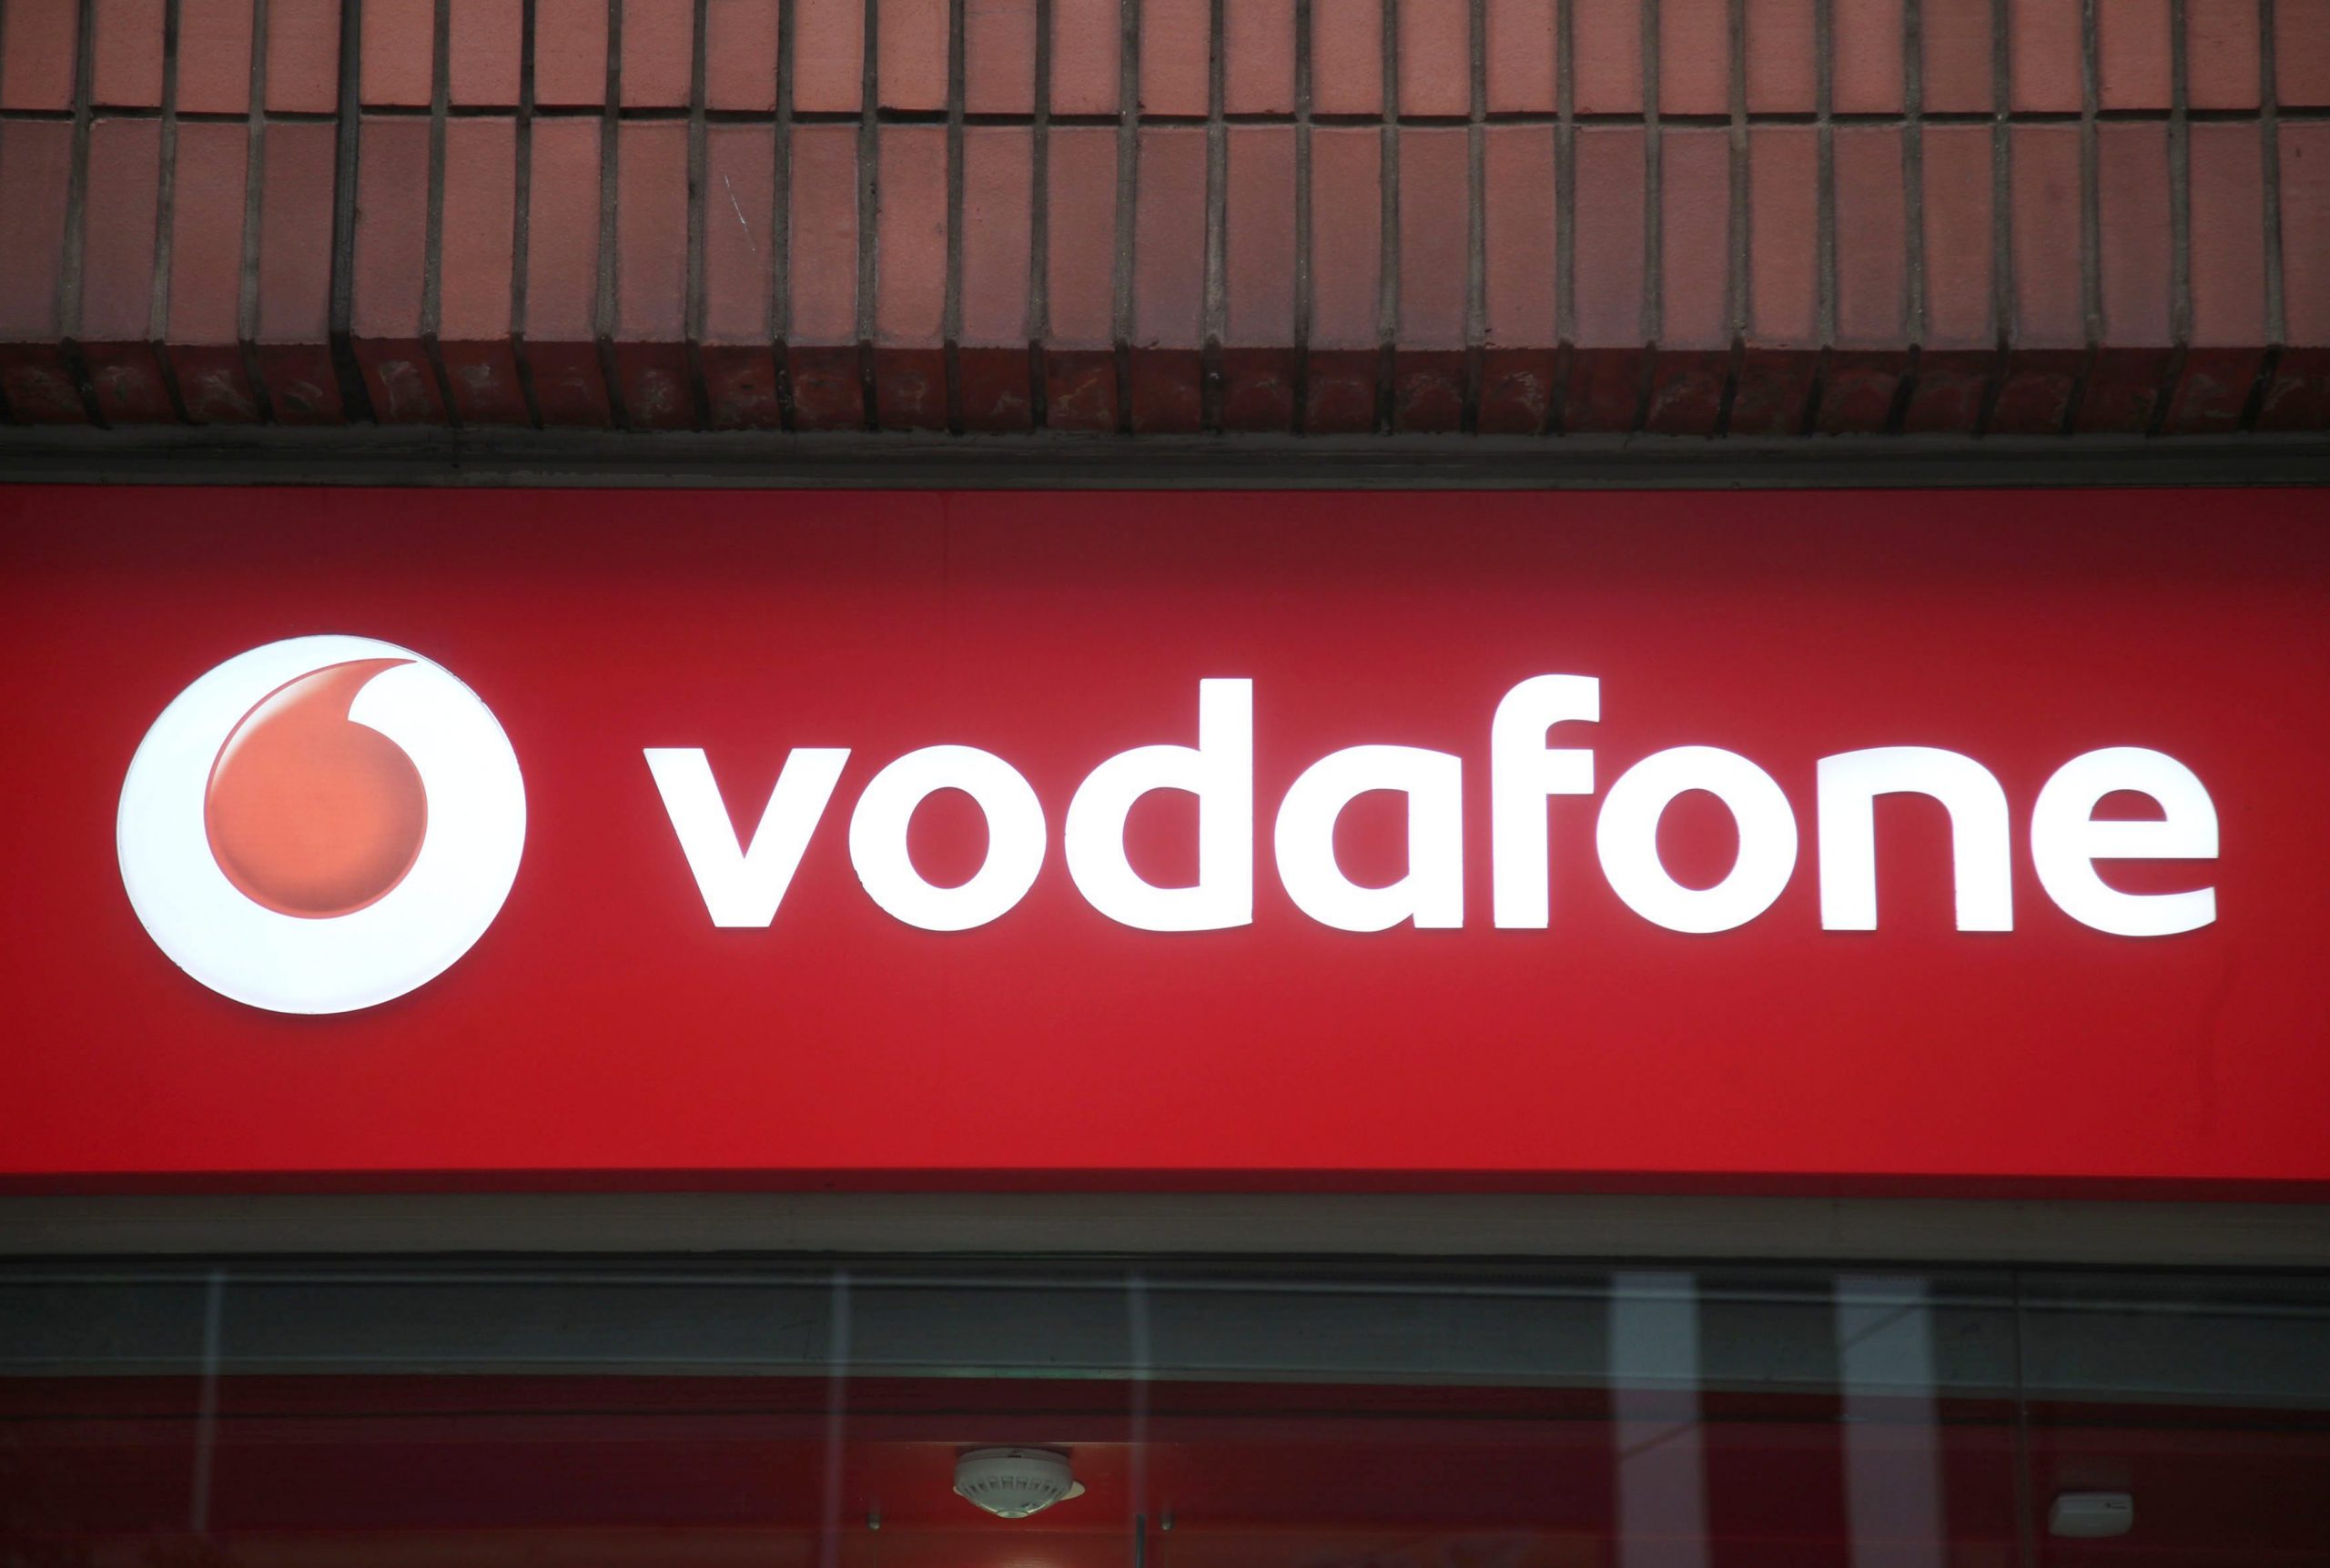 Vodafone Spain is sold to British firm for £4.4billion